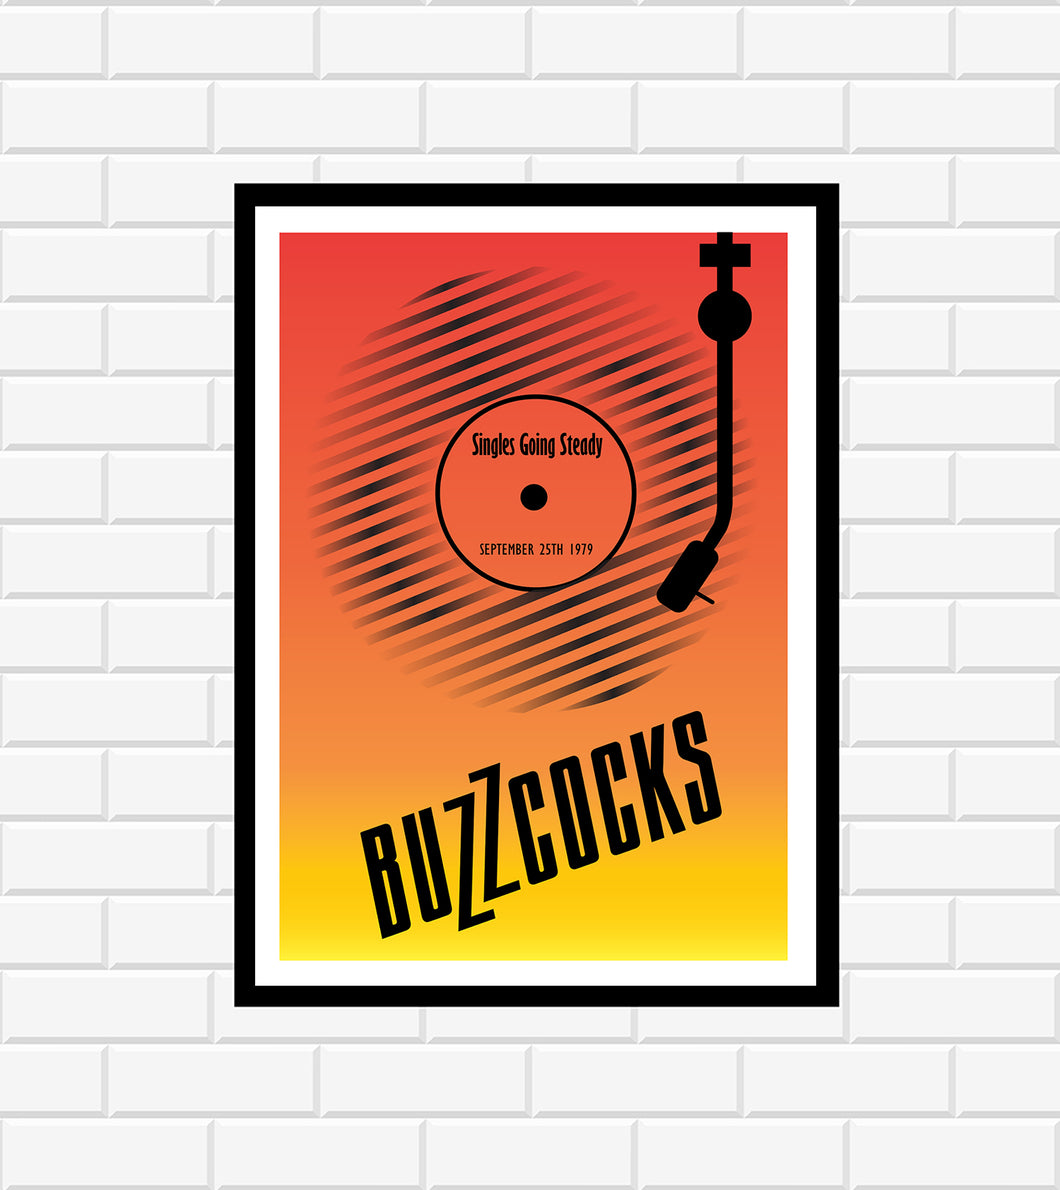 buzzcocks singles going steady poster